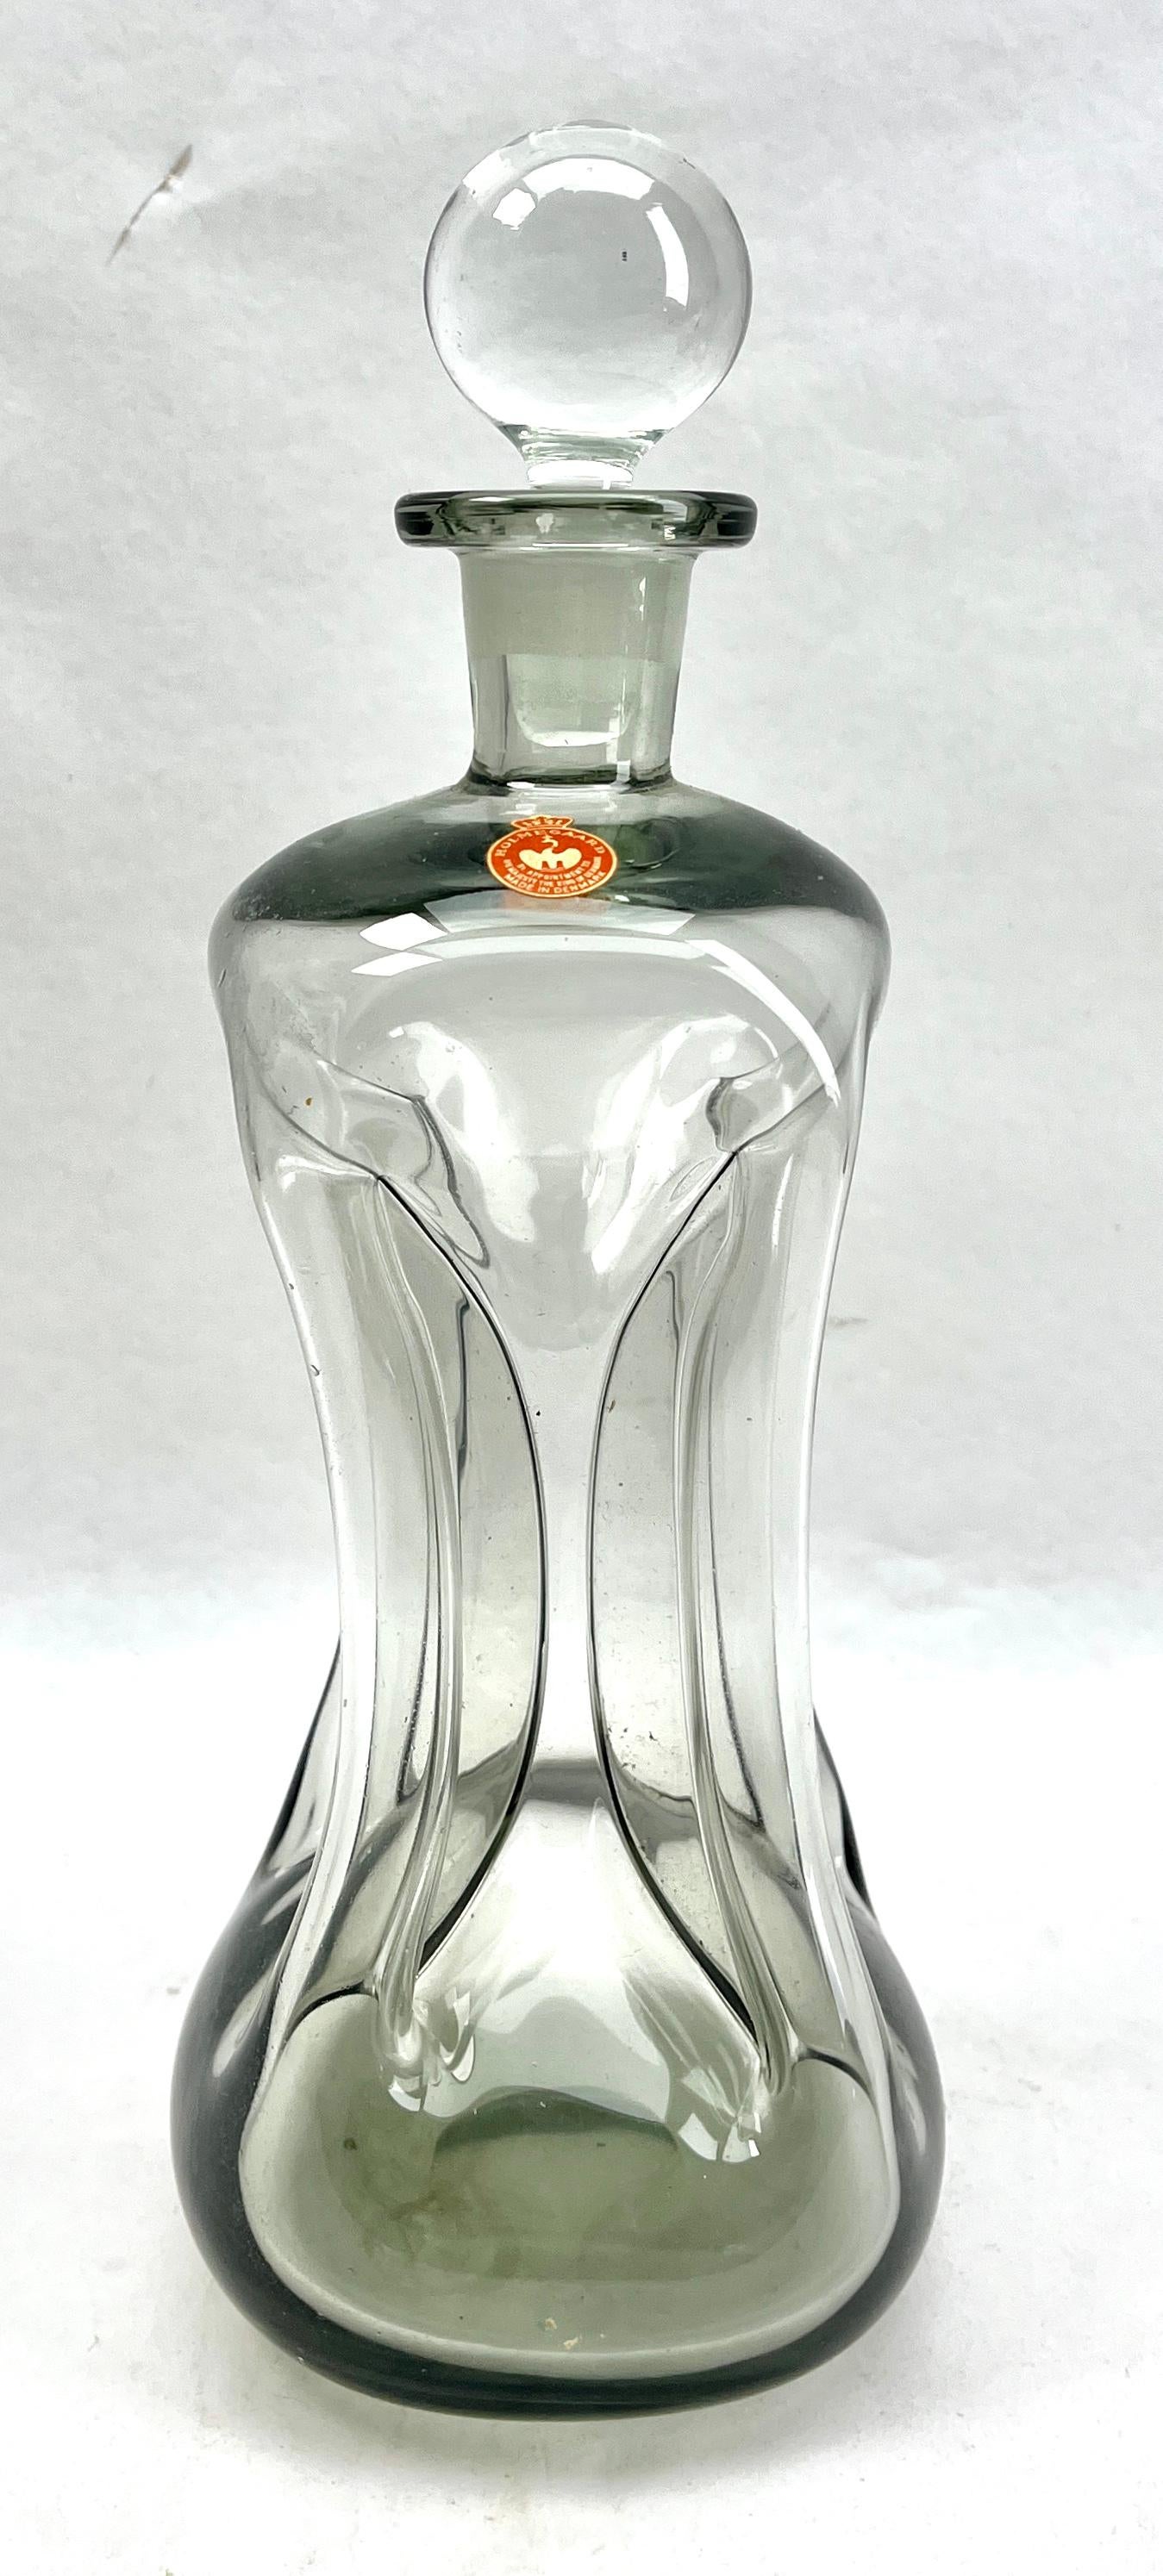 Danish of Jacob E. Bang Kluk Kluk decanter, 1960s

Pair of Jacob E. Bang kluk kluk decanters from the 1960s. The Danish architect designed mouth-blown decanter made glass for the glass manufacturer Holmegaard-Kastrup. 
The vessels are in perfect